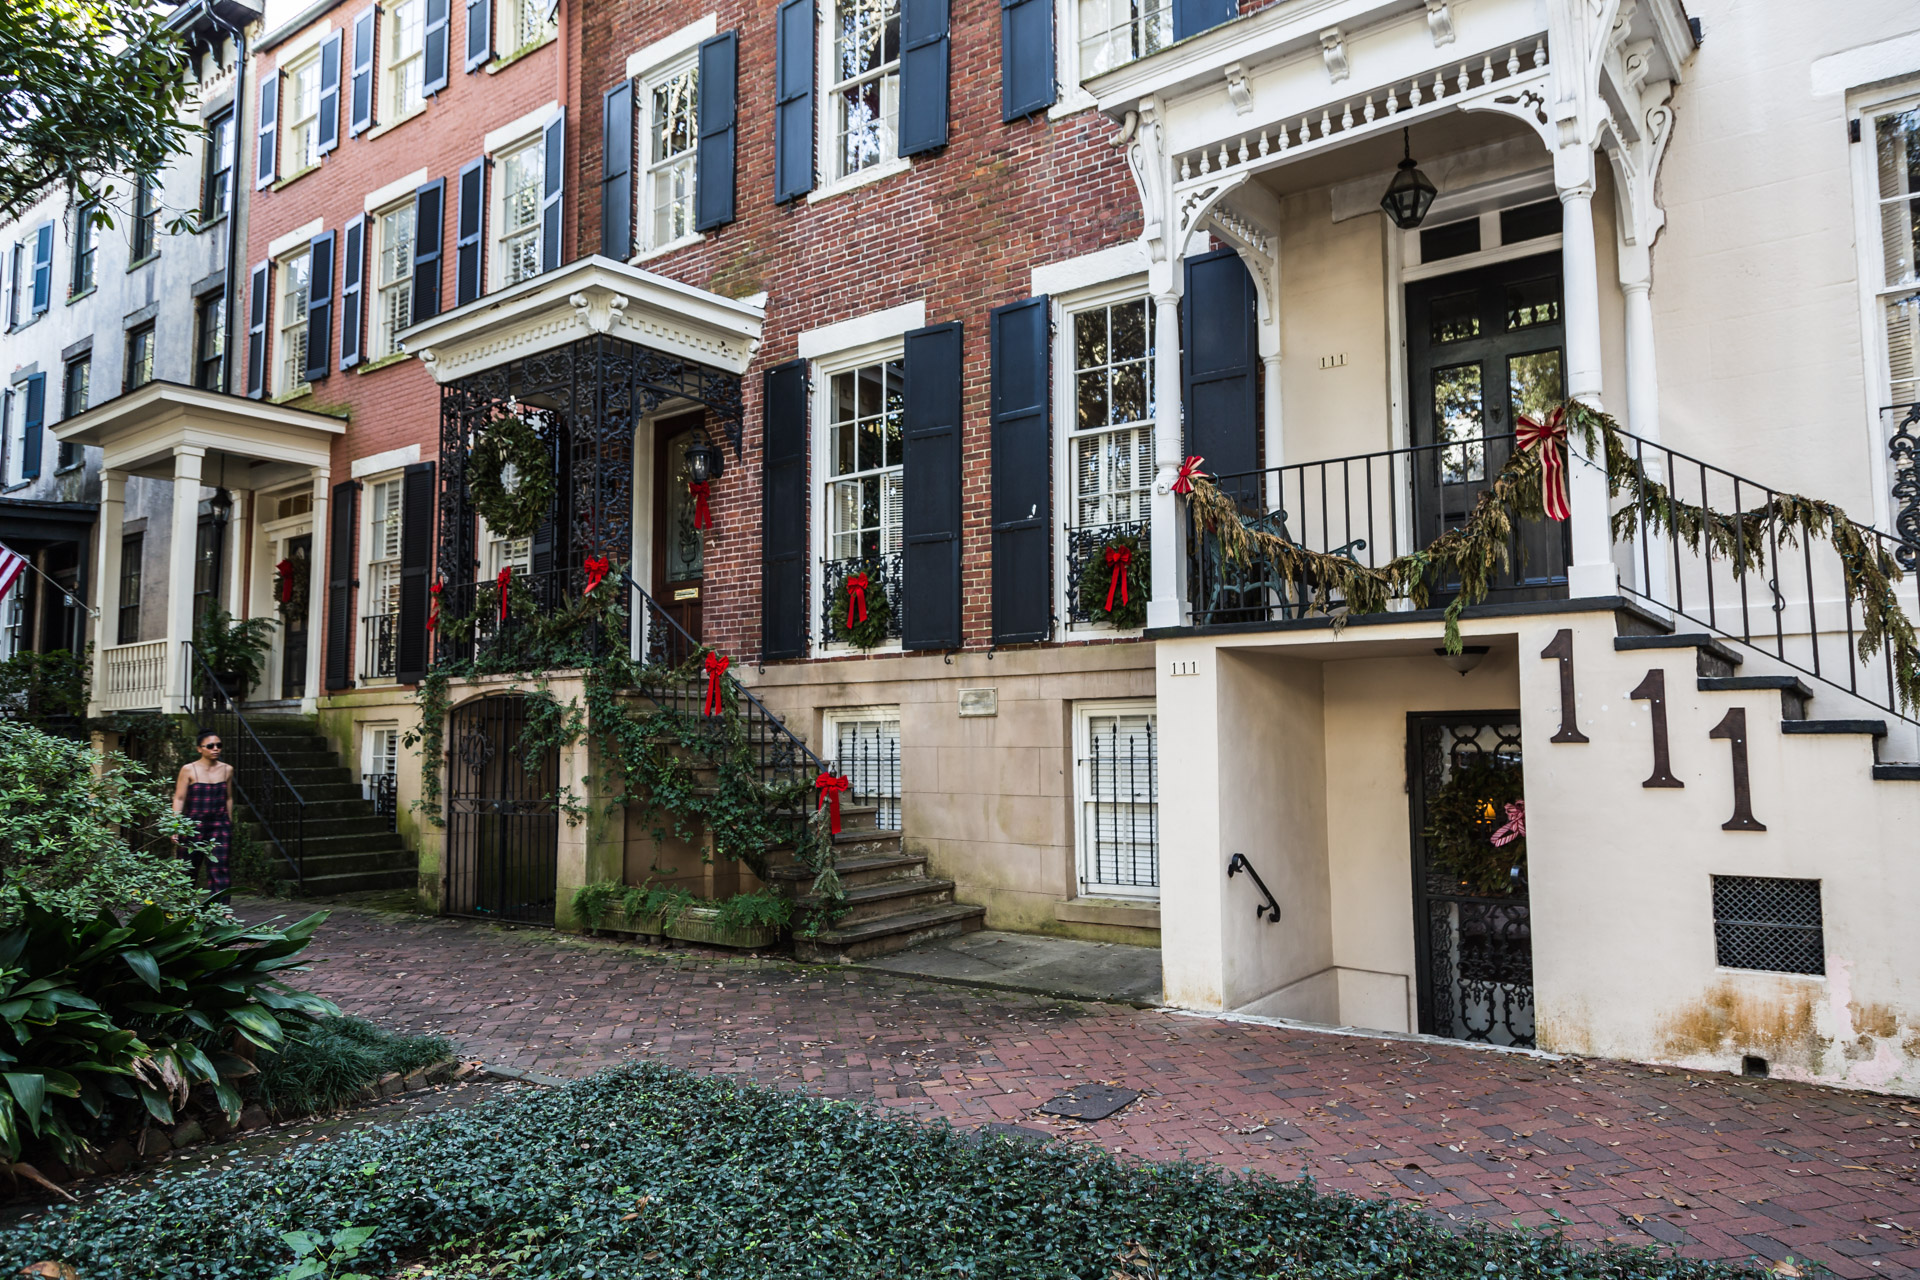 Getting To Know Savannah (holiday decor)